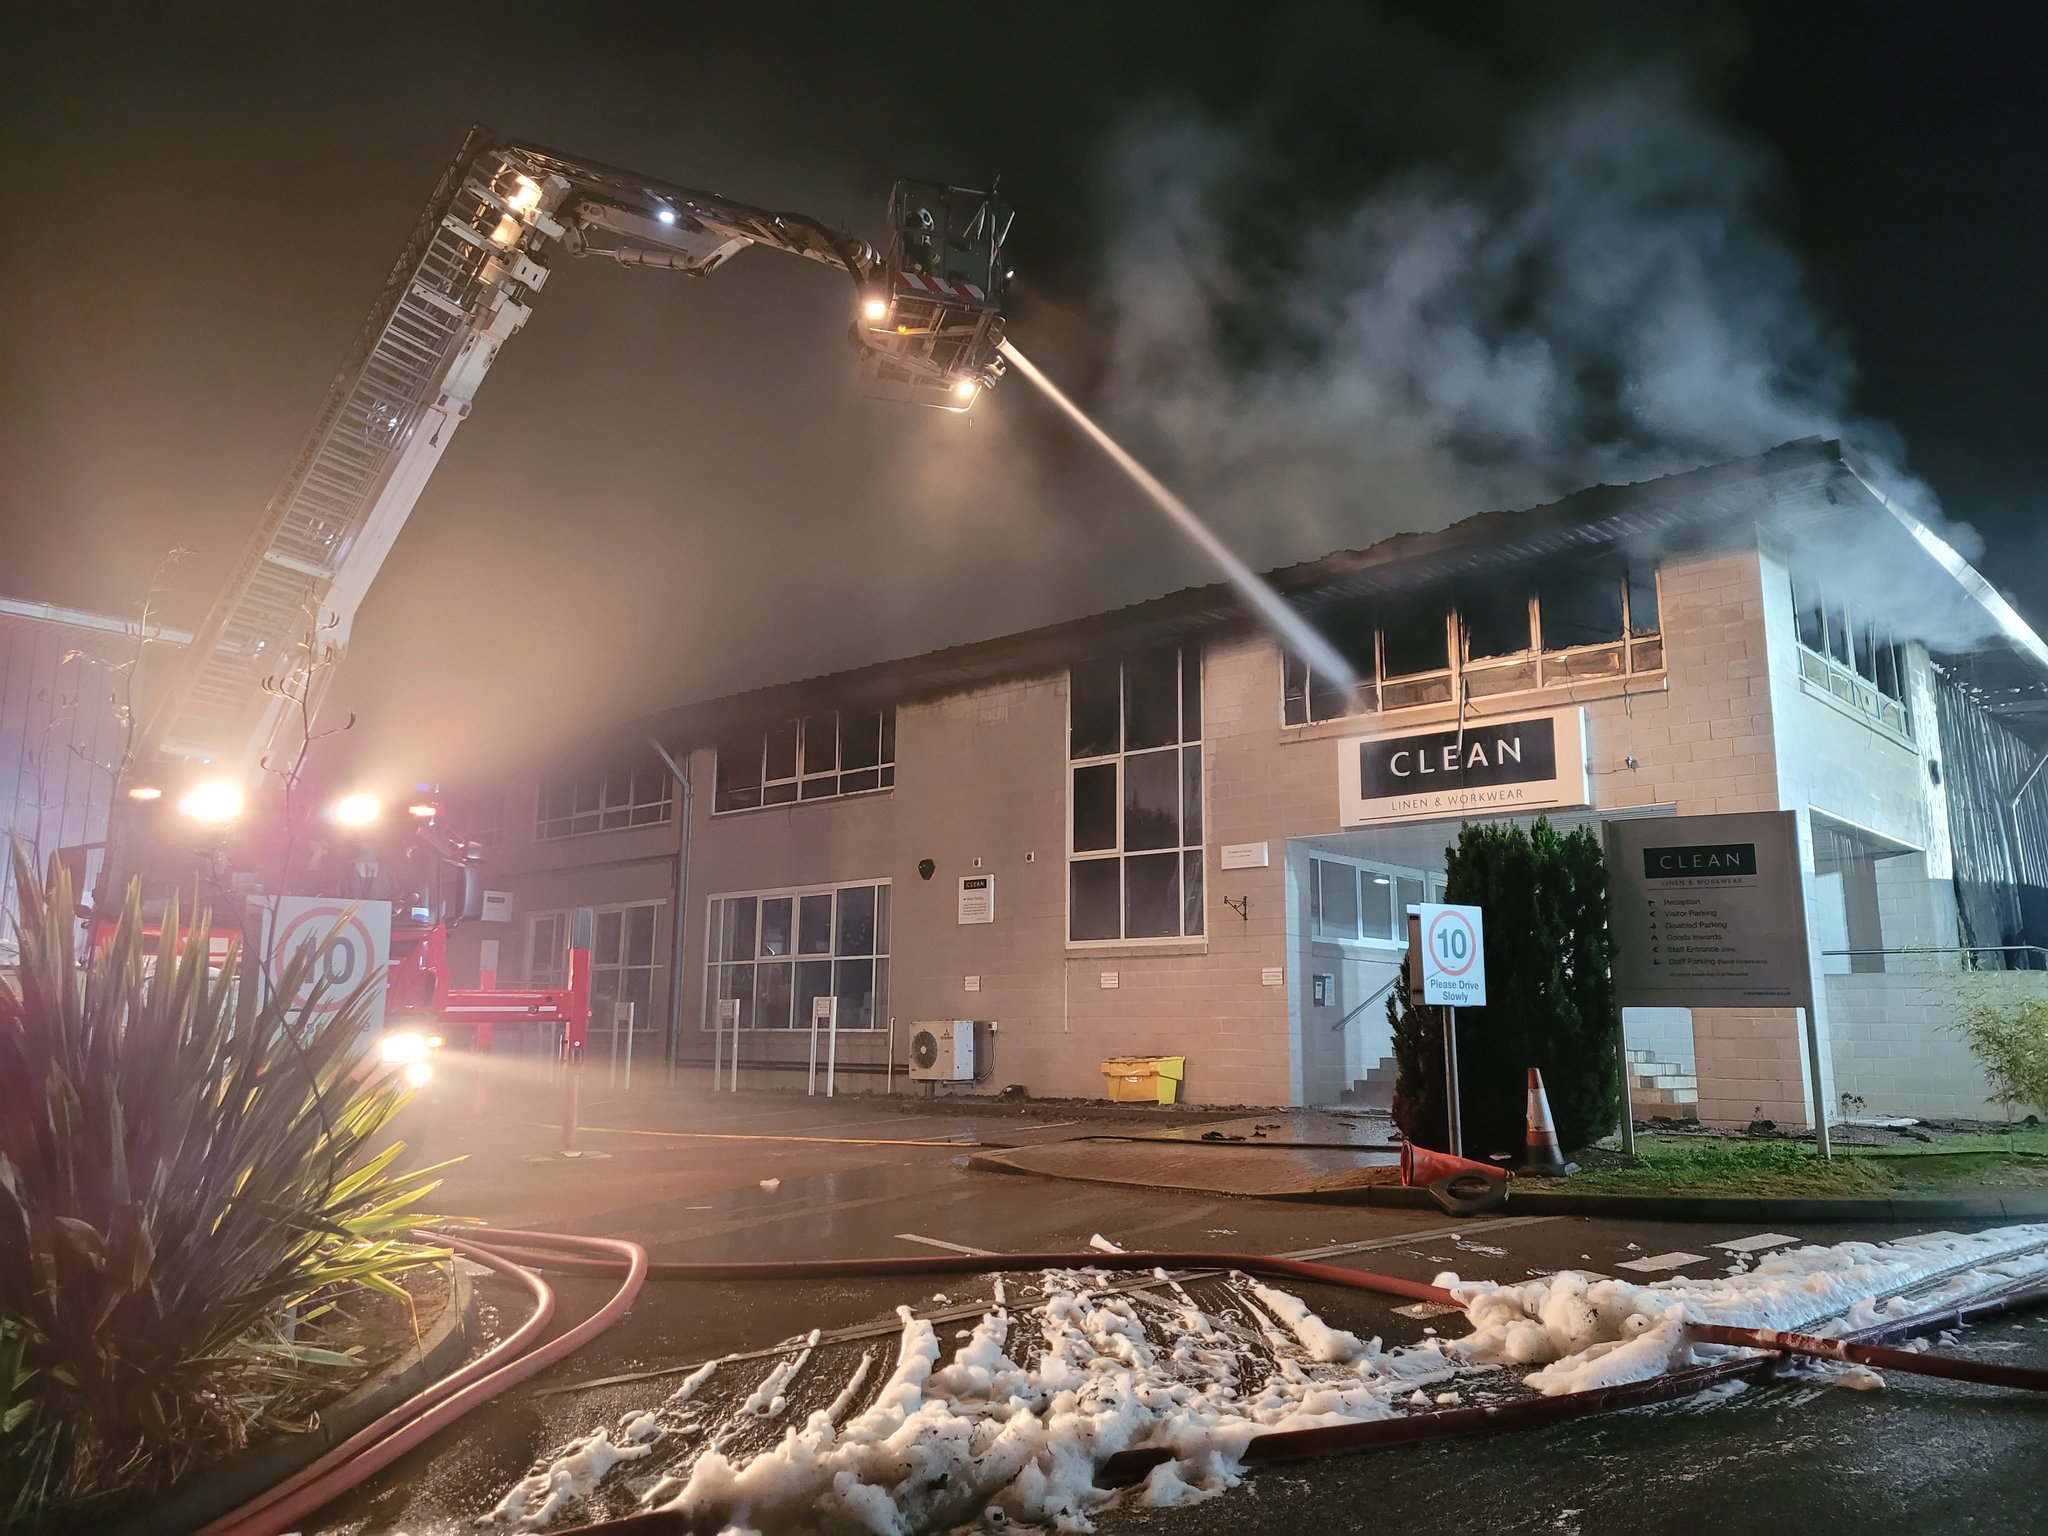 NEWS | Fire crews called to a huge factory fire in Herefordshire overnight